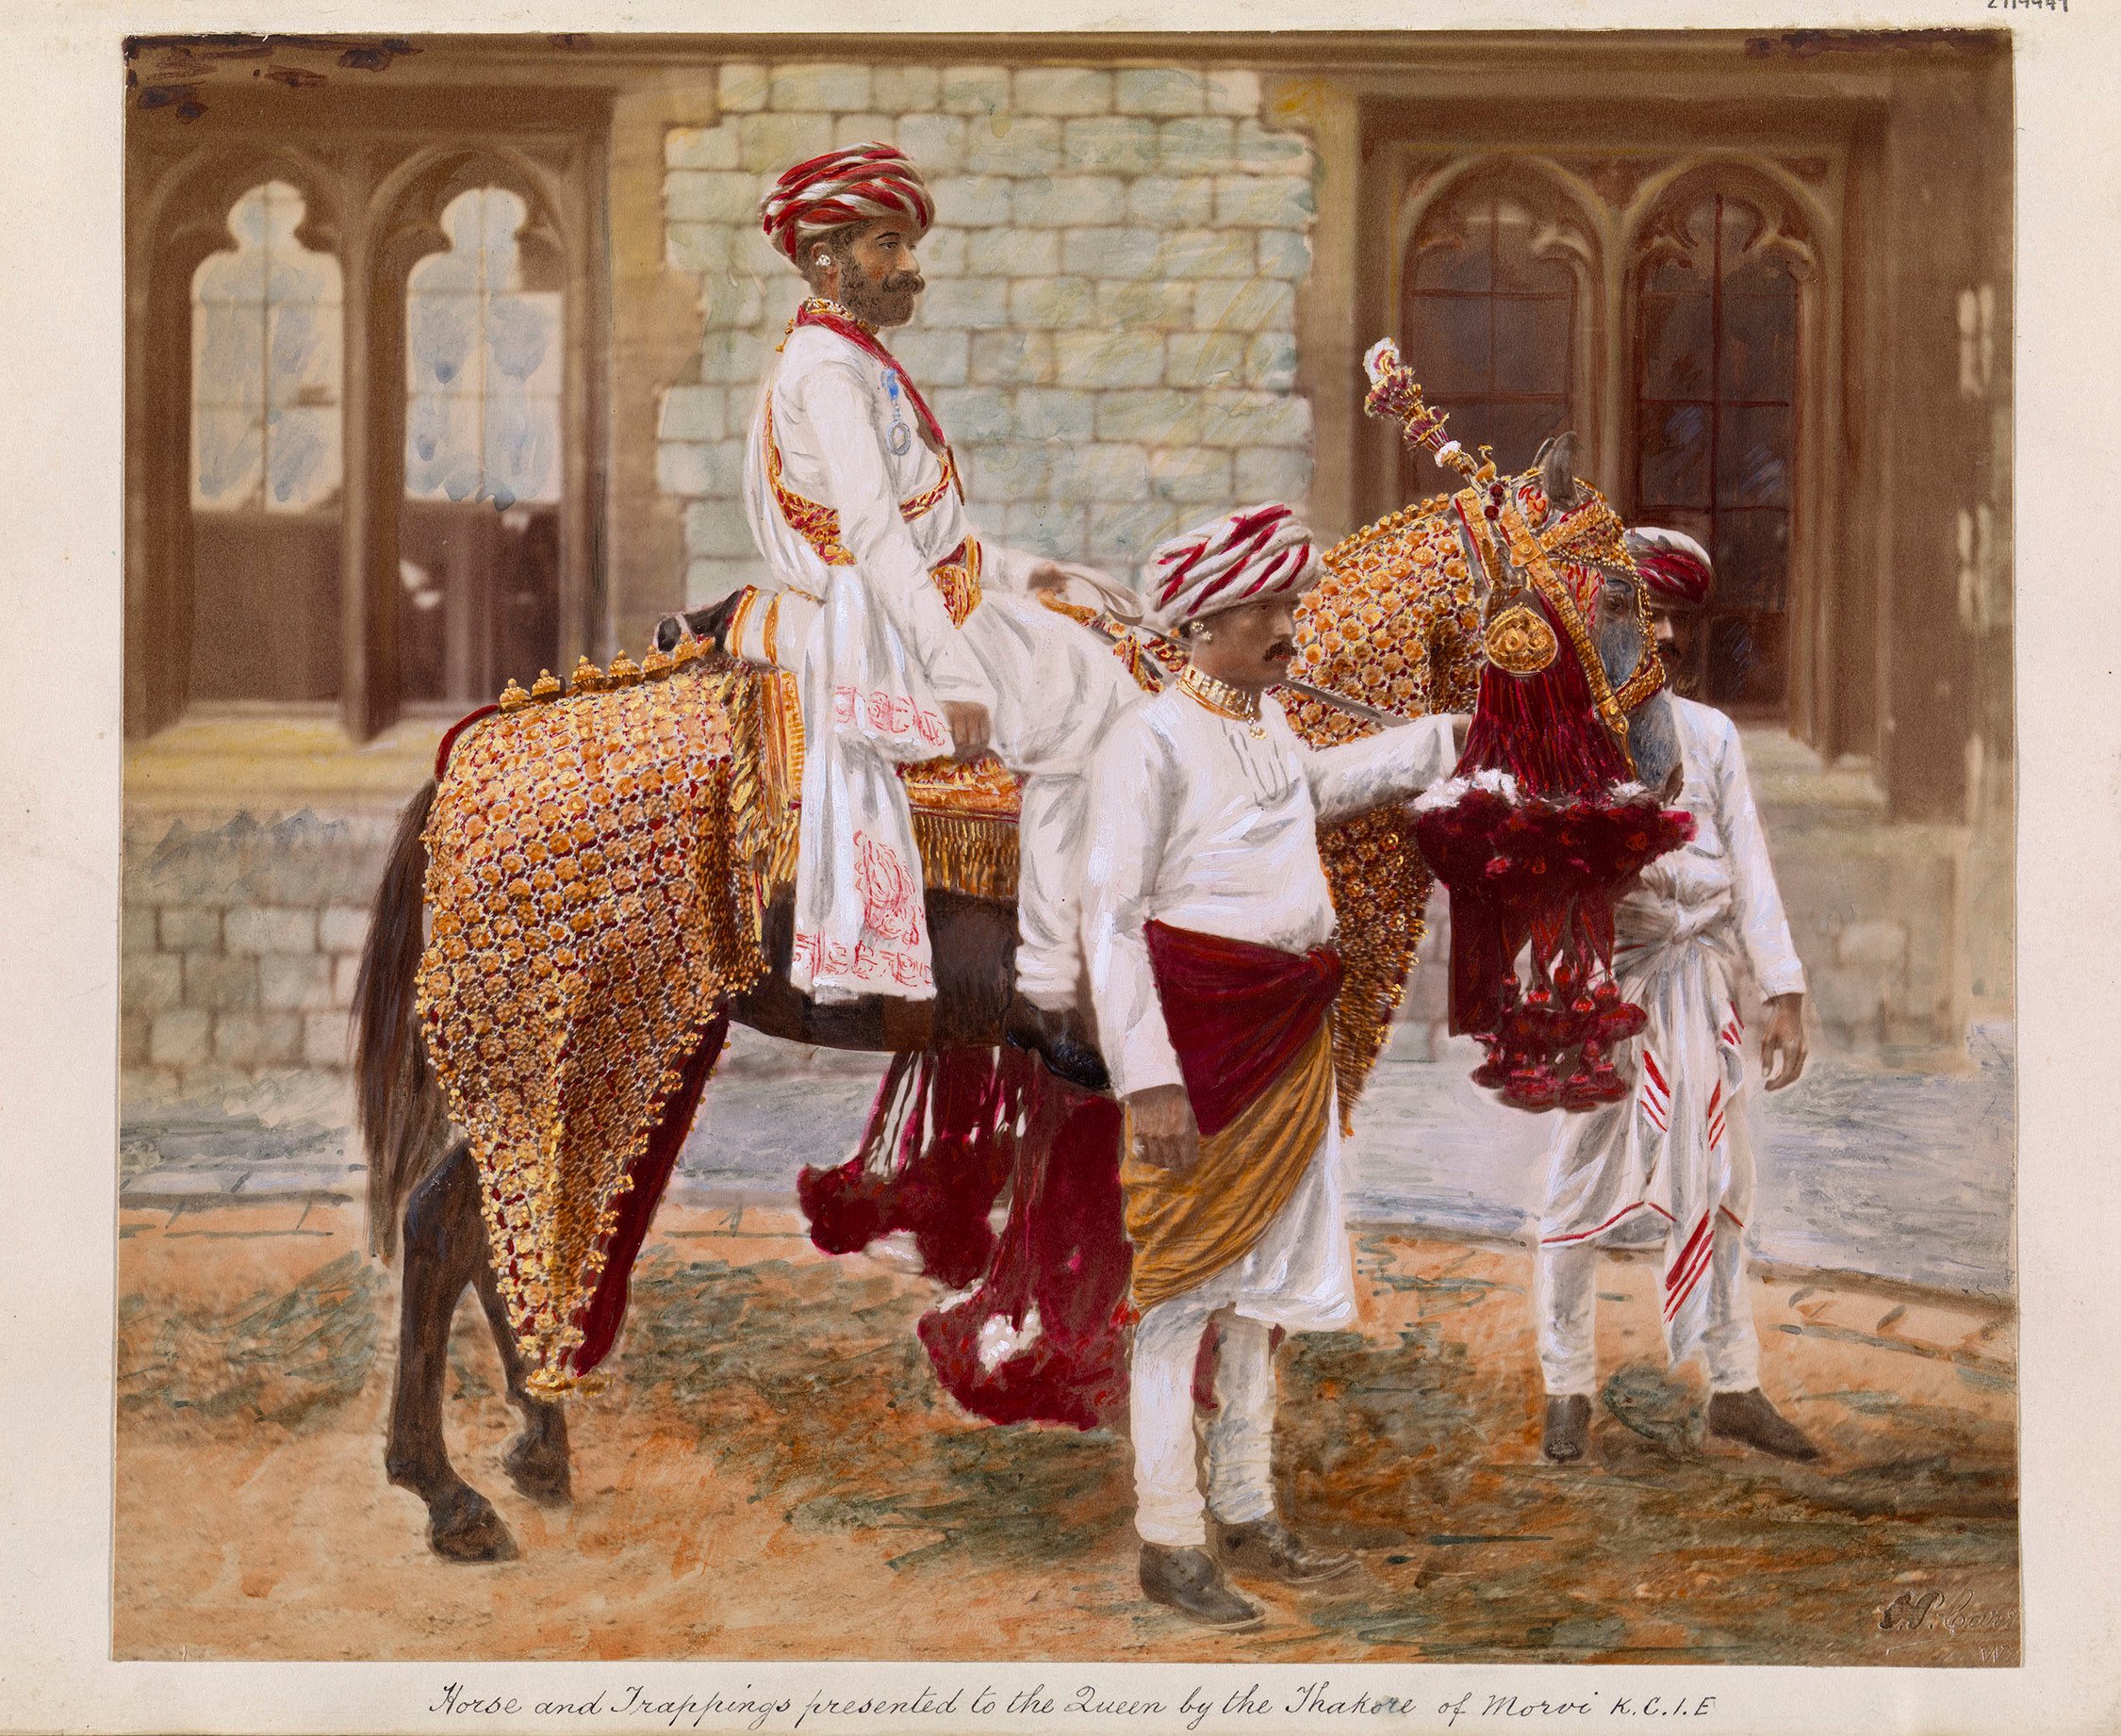 Hand-coloured photographic print of horse and trappings 